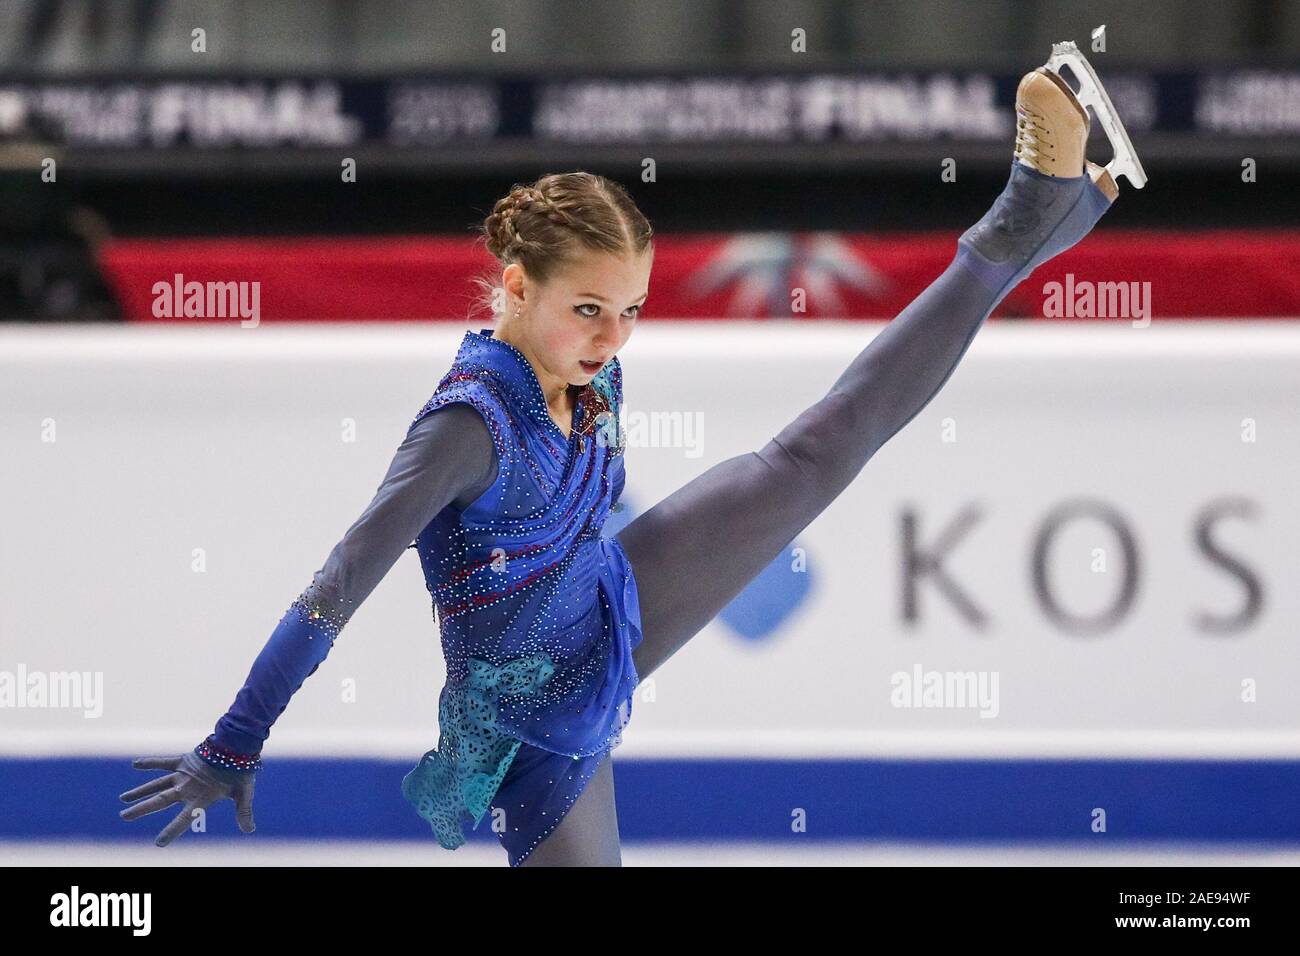 Turin, Italy. 07th Dec, 2019. TURIN, ITALY - DECEMBER 7, 2019: Figure skater  Alexandra Trusova of Russia performs during a ladies' free skating event at  the 2019-20 ISU Grand Prix of Figure